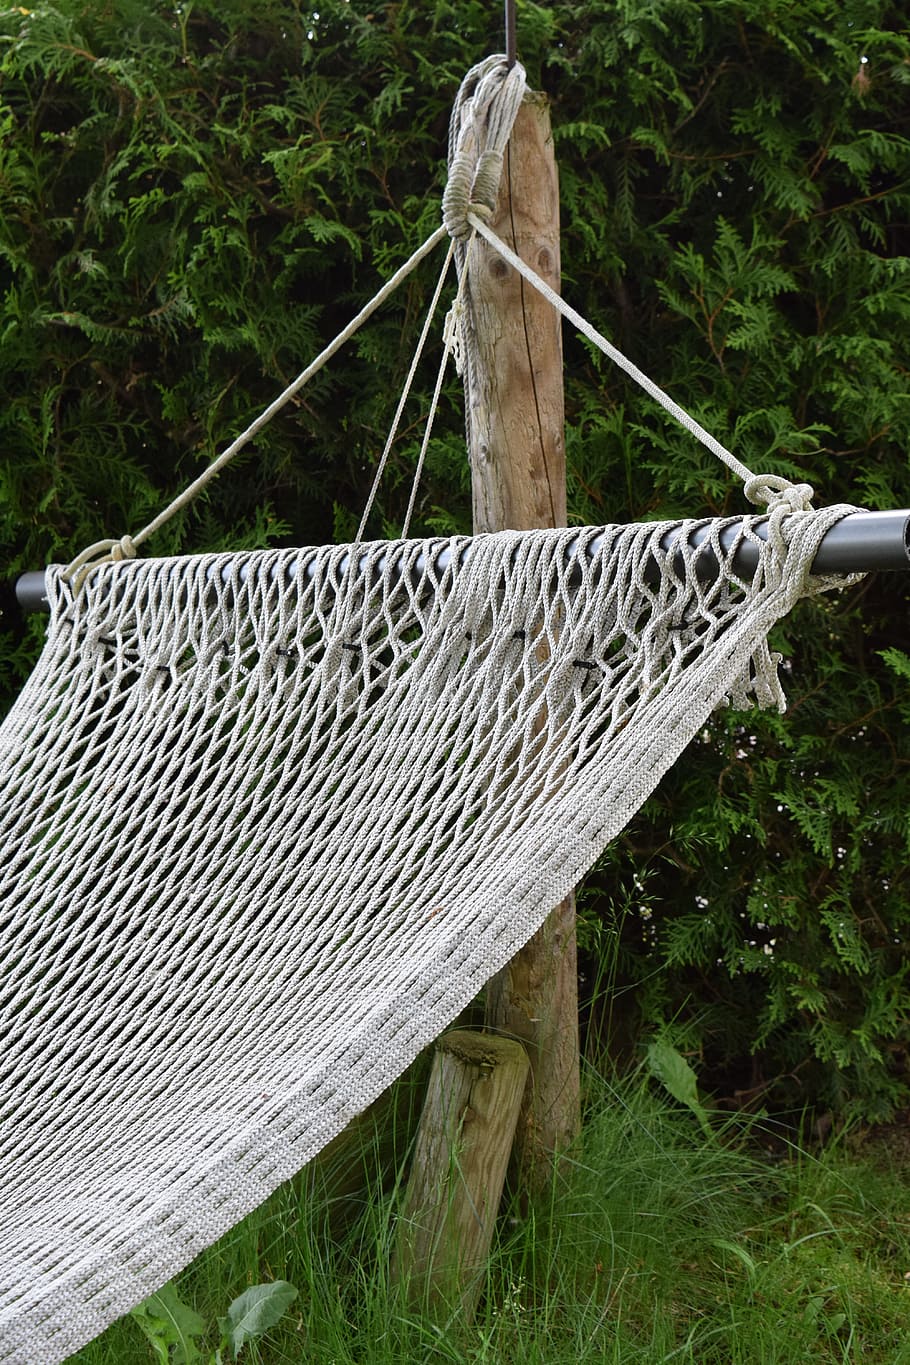 hammock, network, resting place, rest, peaceful, cozy, easily, inviting, garden, nature